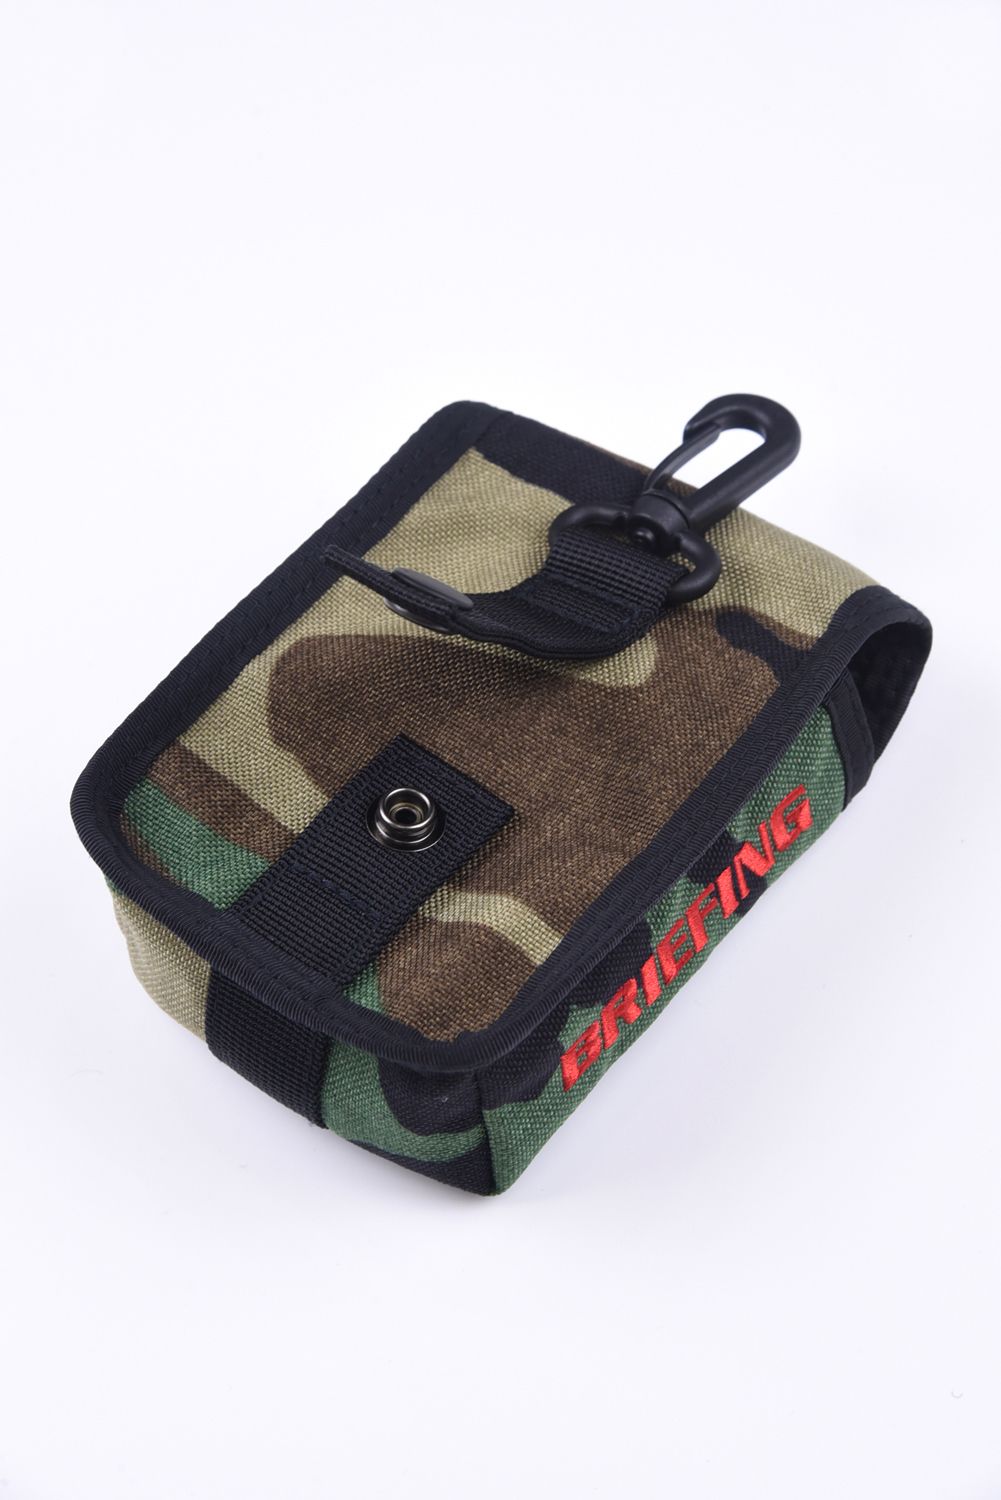 BRIEFING - 【1000Dコーデュラナイロン】 SCOPE BOX POUCH / スコープ 